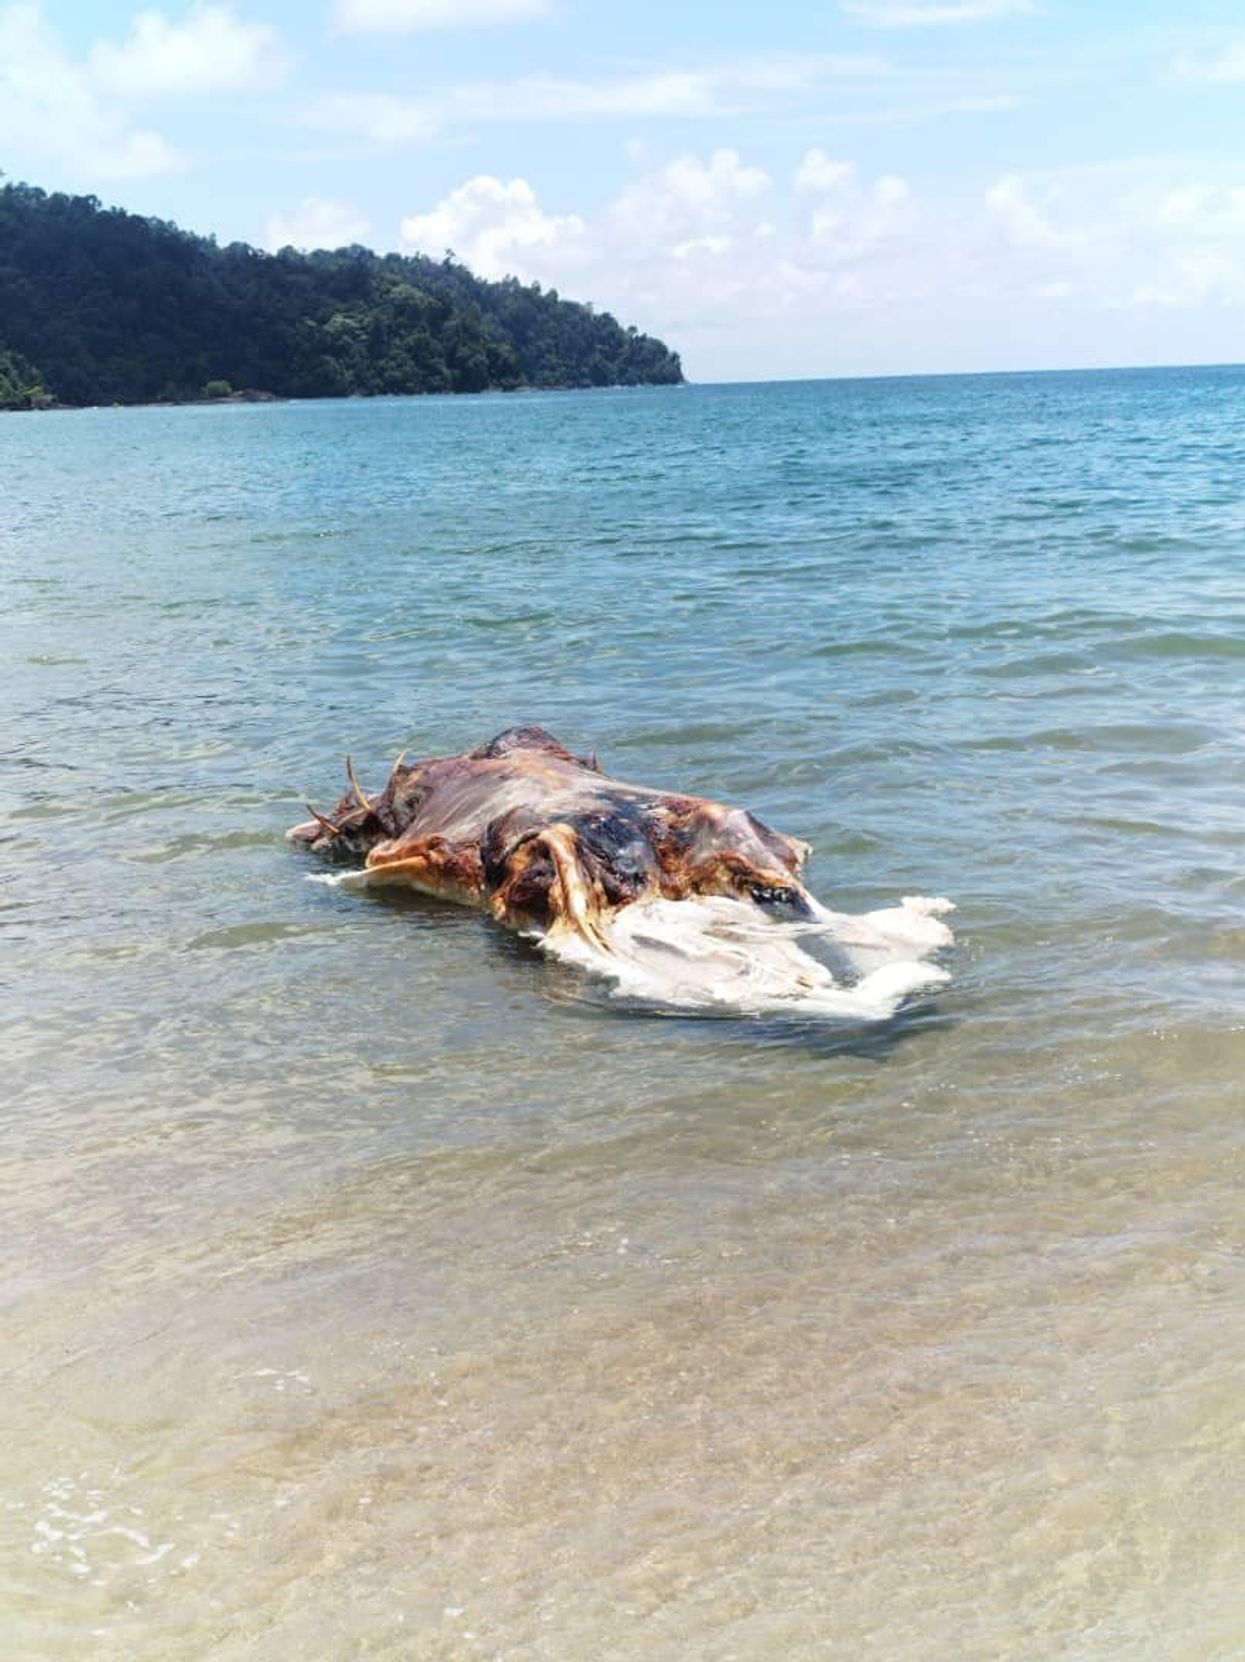 Unidentified 'monster' washes up on beach in Malaysia